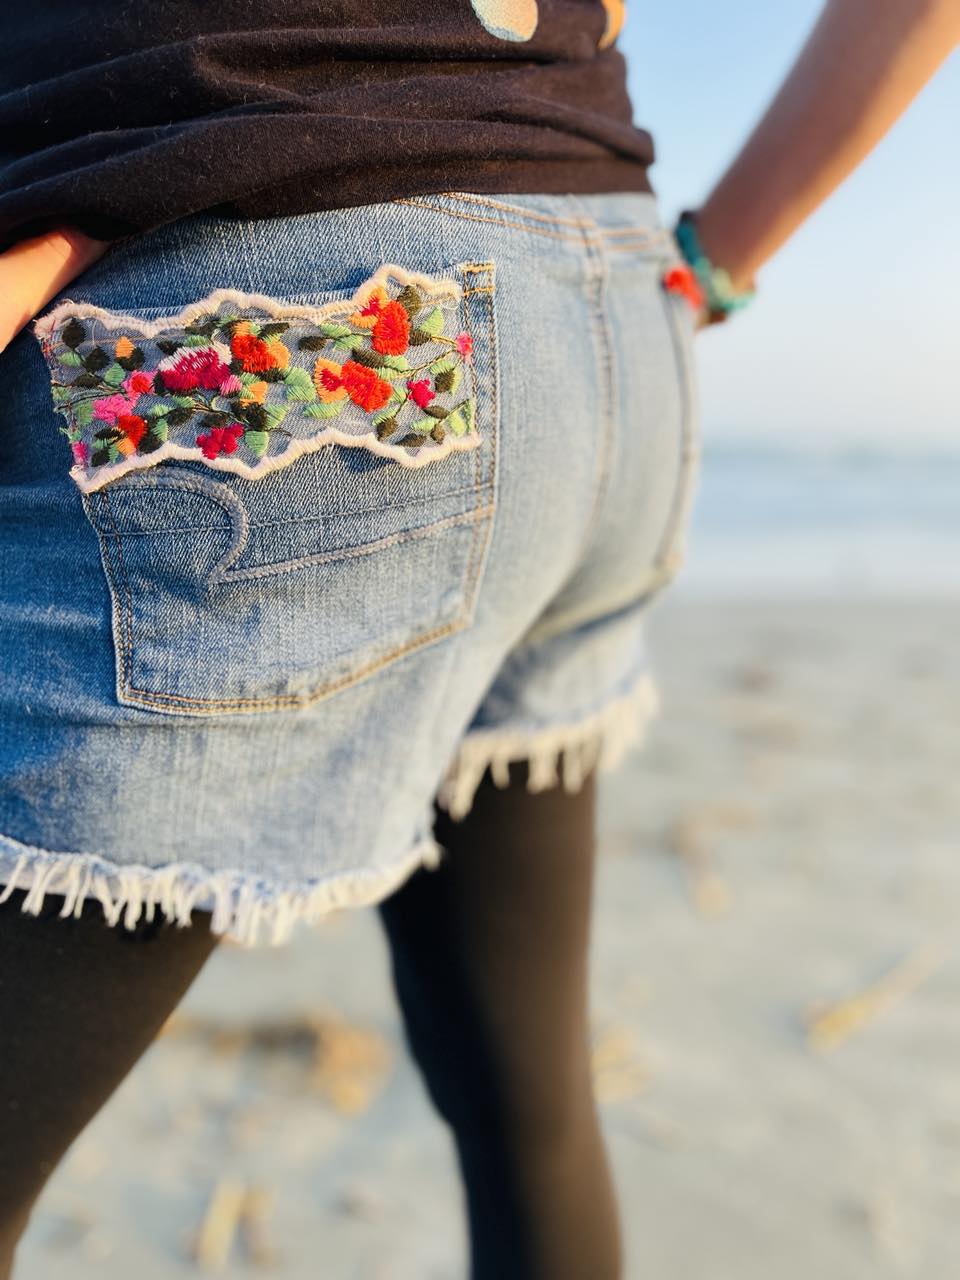 Upcycled Boho-Chic Jean Shorts with Handstitched Details